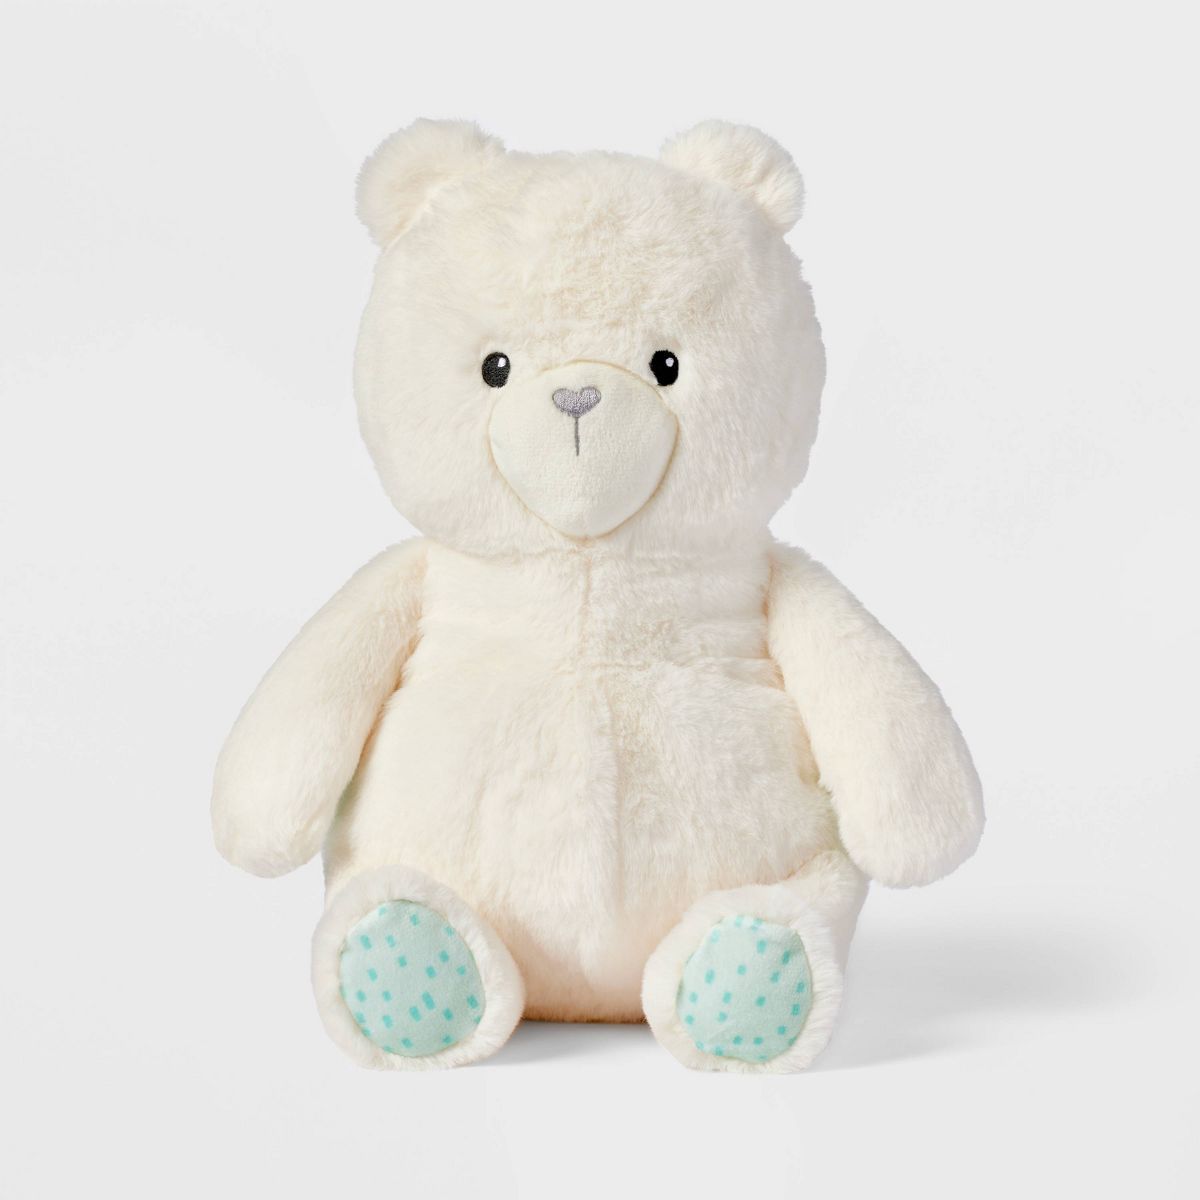 12'' Ivory Bear Stuffed Animal with Heart Shaped Nose - Gigglescape™ | Target